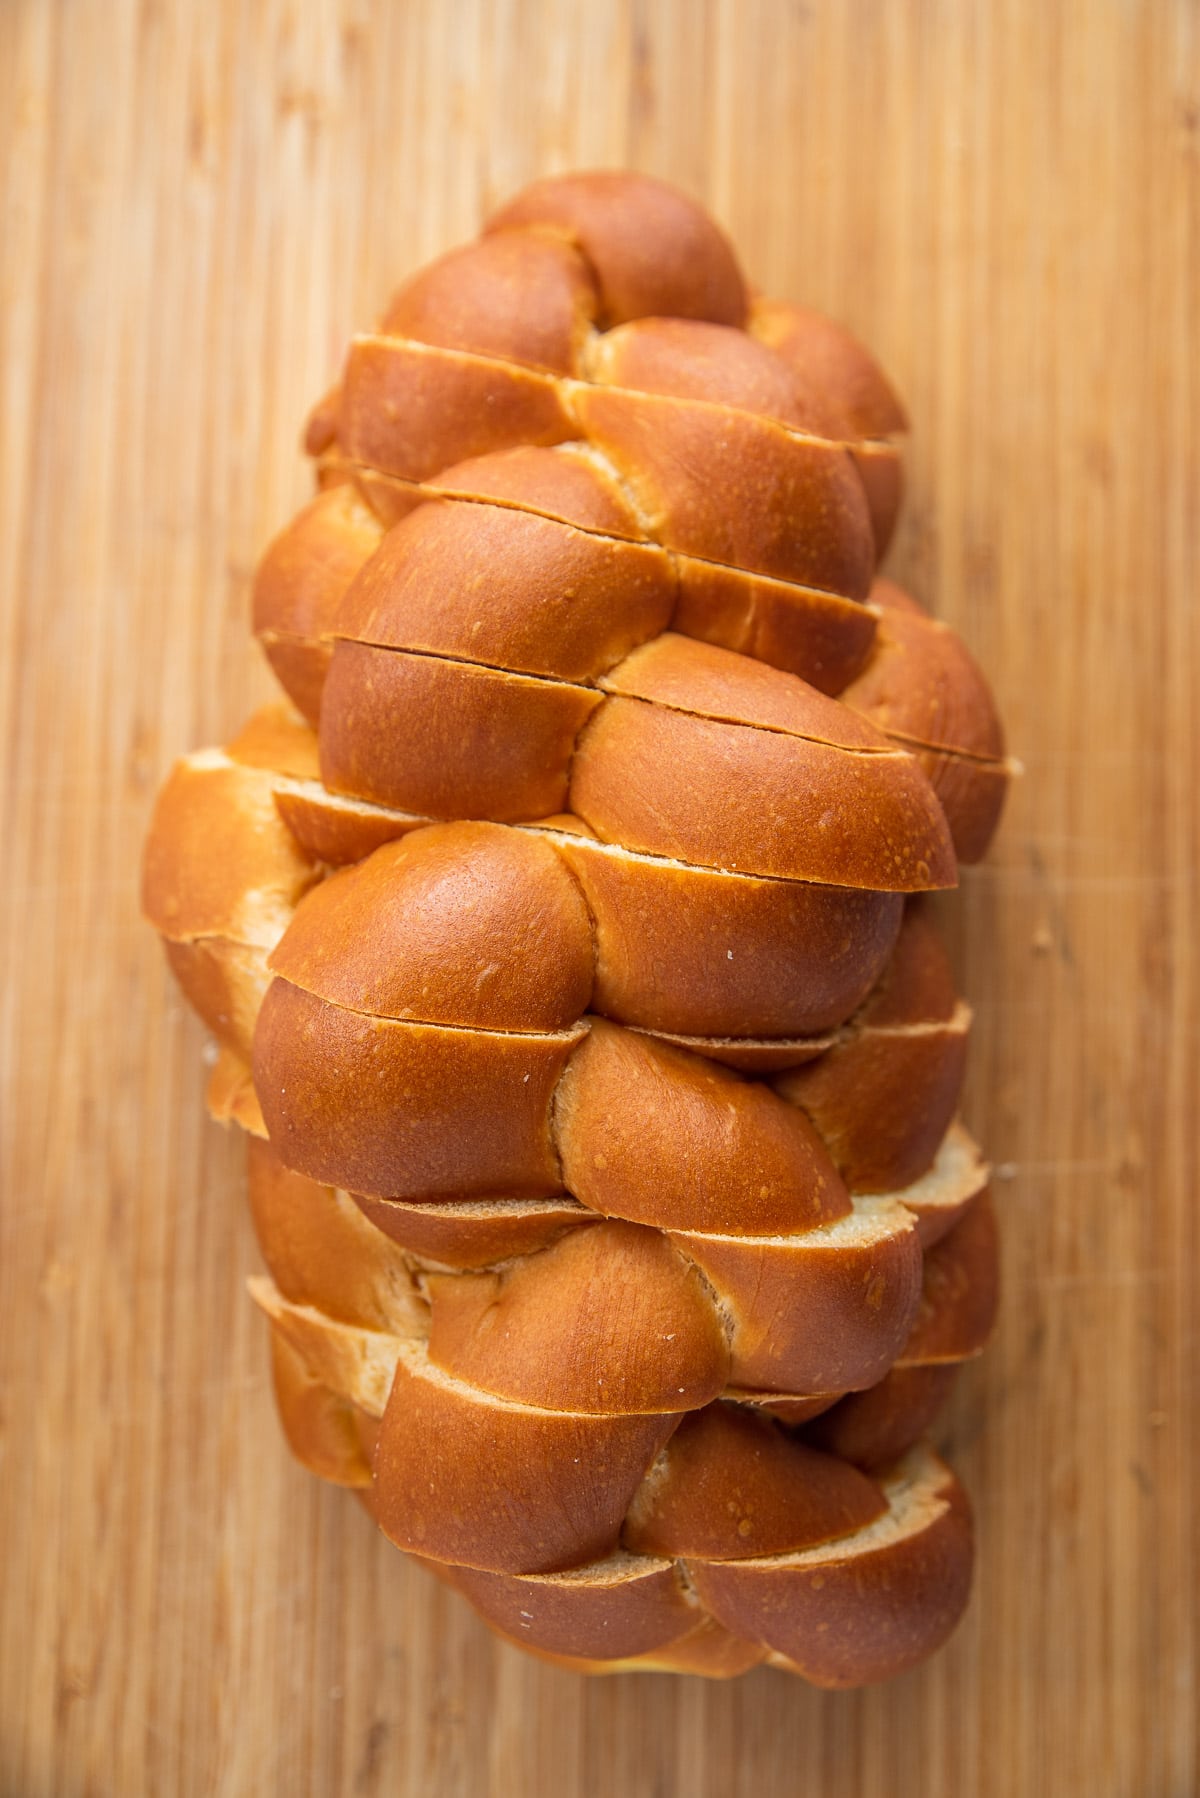 A loaf of challah bread cut into thick slices